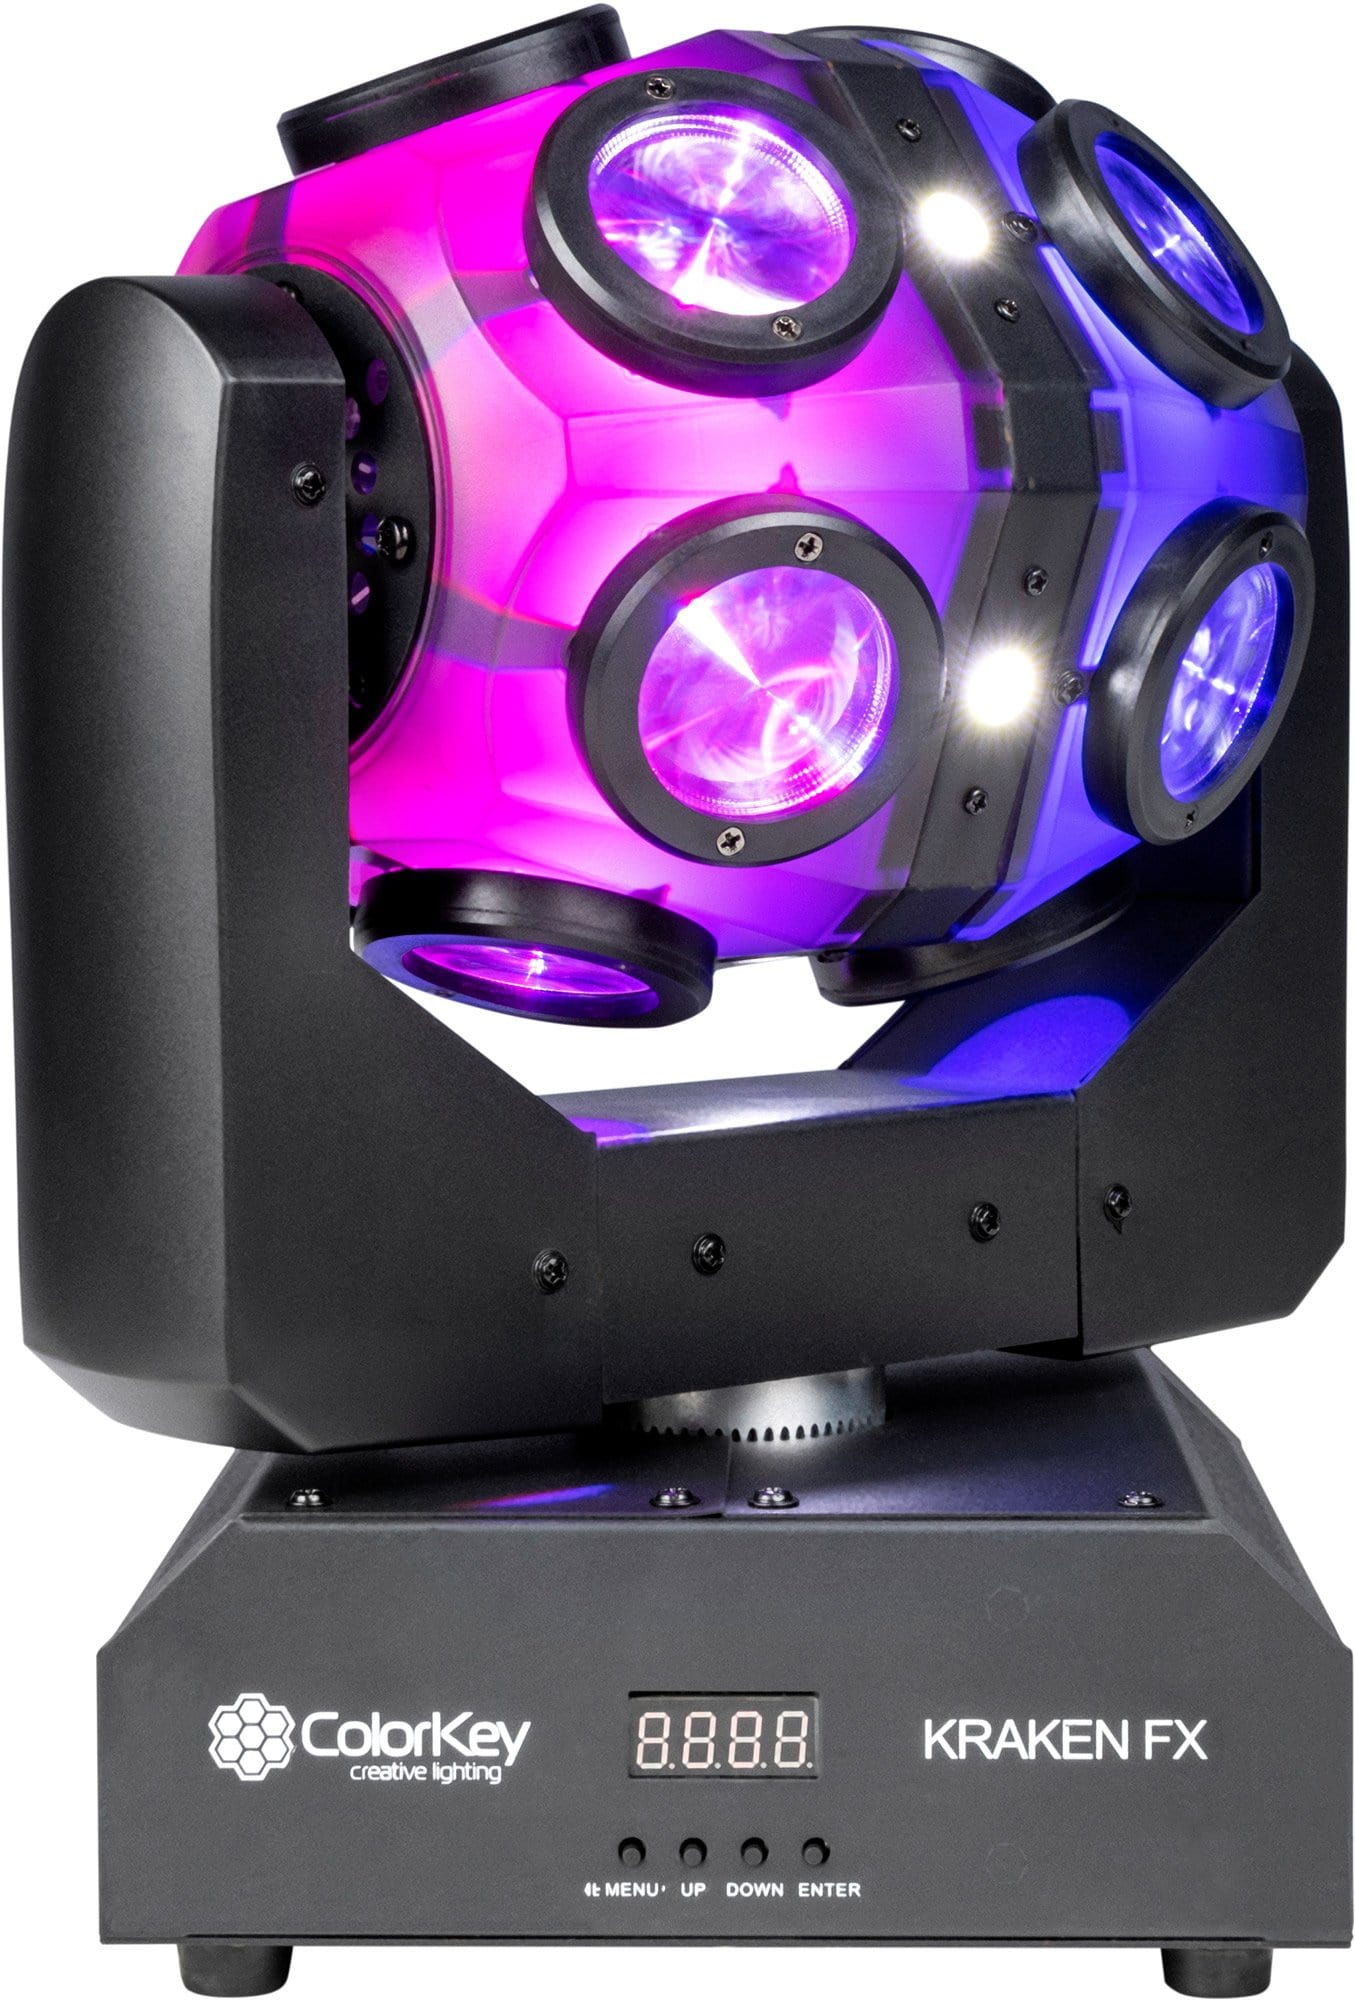 ColorKey Kraken FX LED Moving Head Effects Light - PSSL ProSound and Stage Lighting